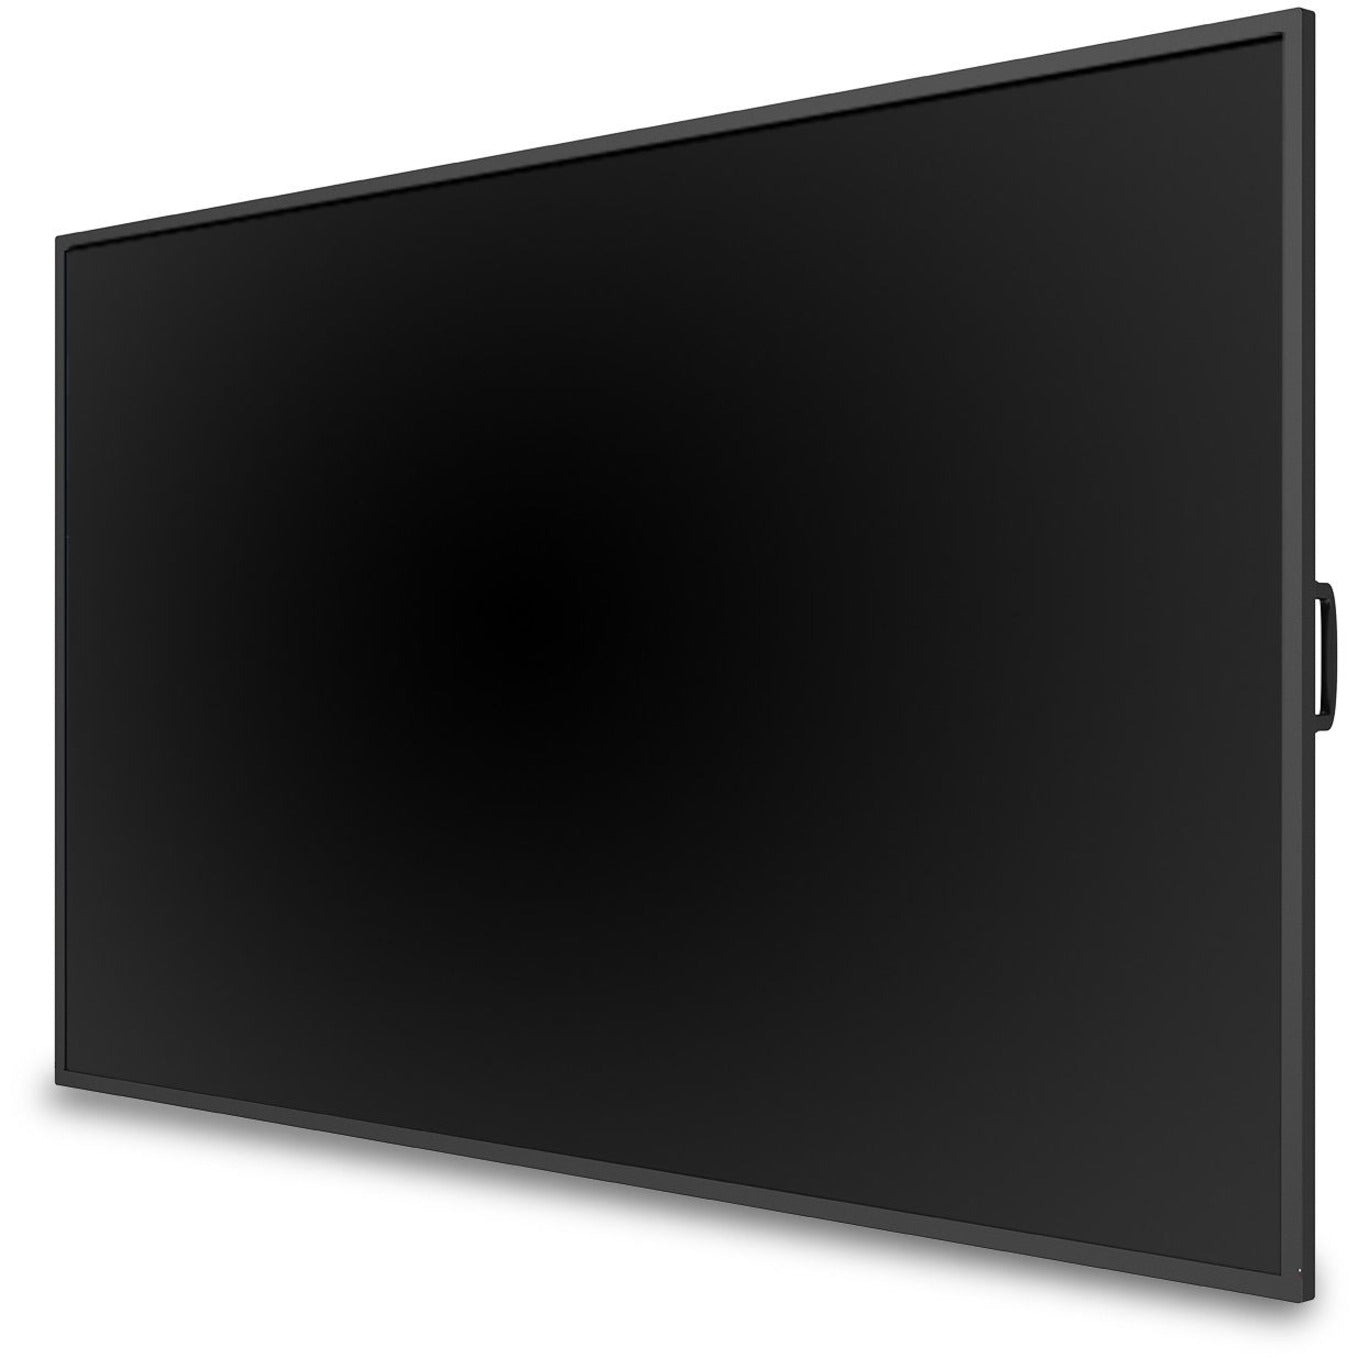 ViewSonic Commercial Display CDE9830 - 4K 24/7 Operation Integrated Software 4GB RAM 32GB Storage - 500 cd/m2 - 98"